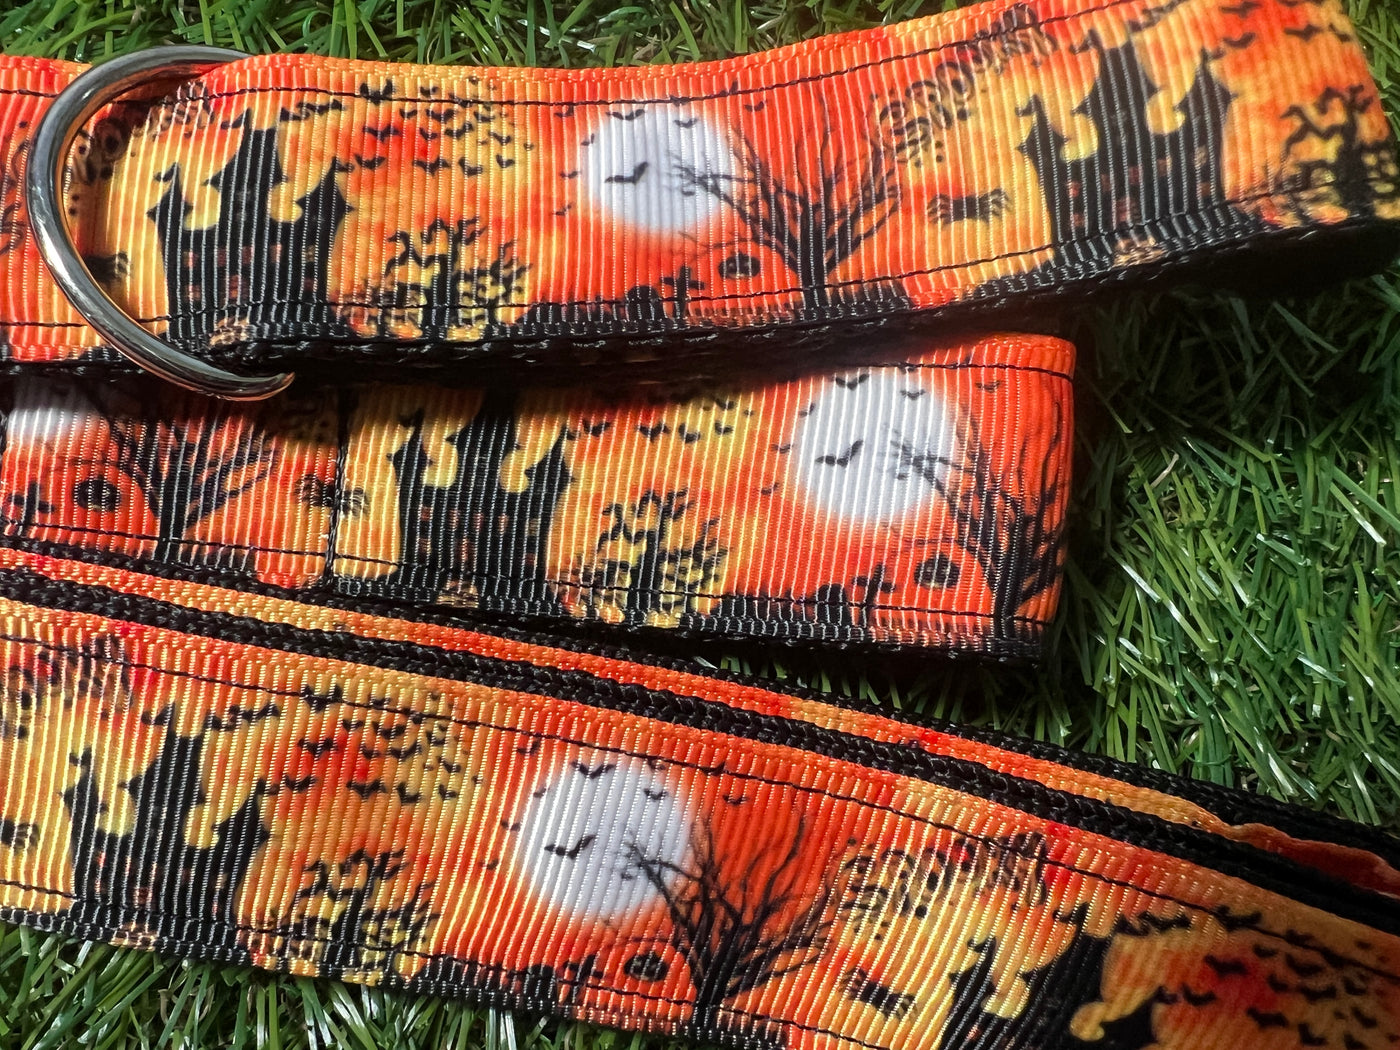 Haunted House Orange and Black Roller Skate Leash with D Rings - Adjustable - Yoga Mat Strap - Skateboard Sling - Artist Sonch Curiosities